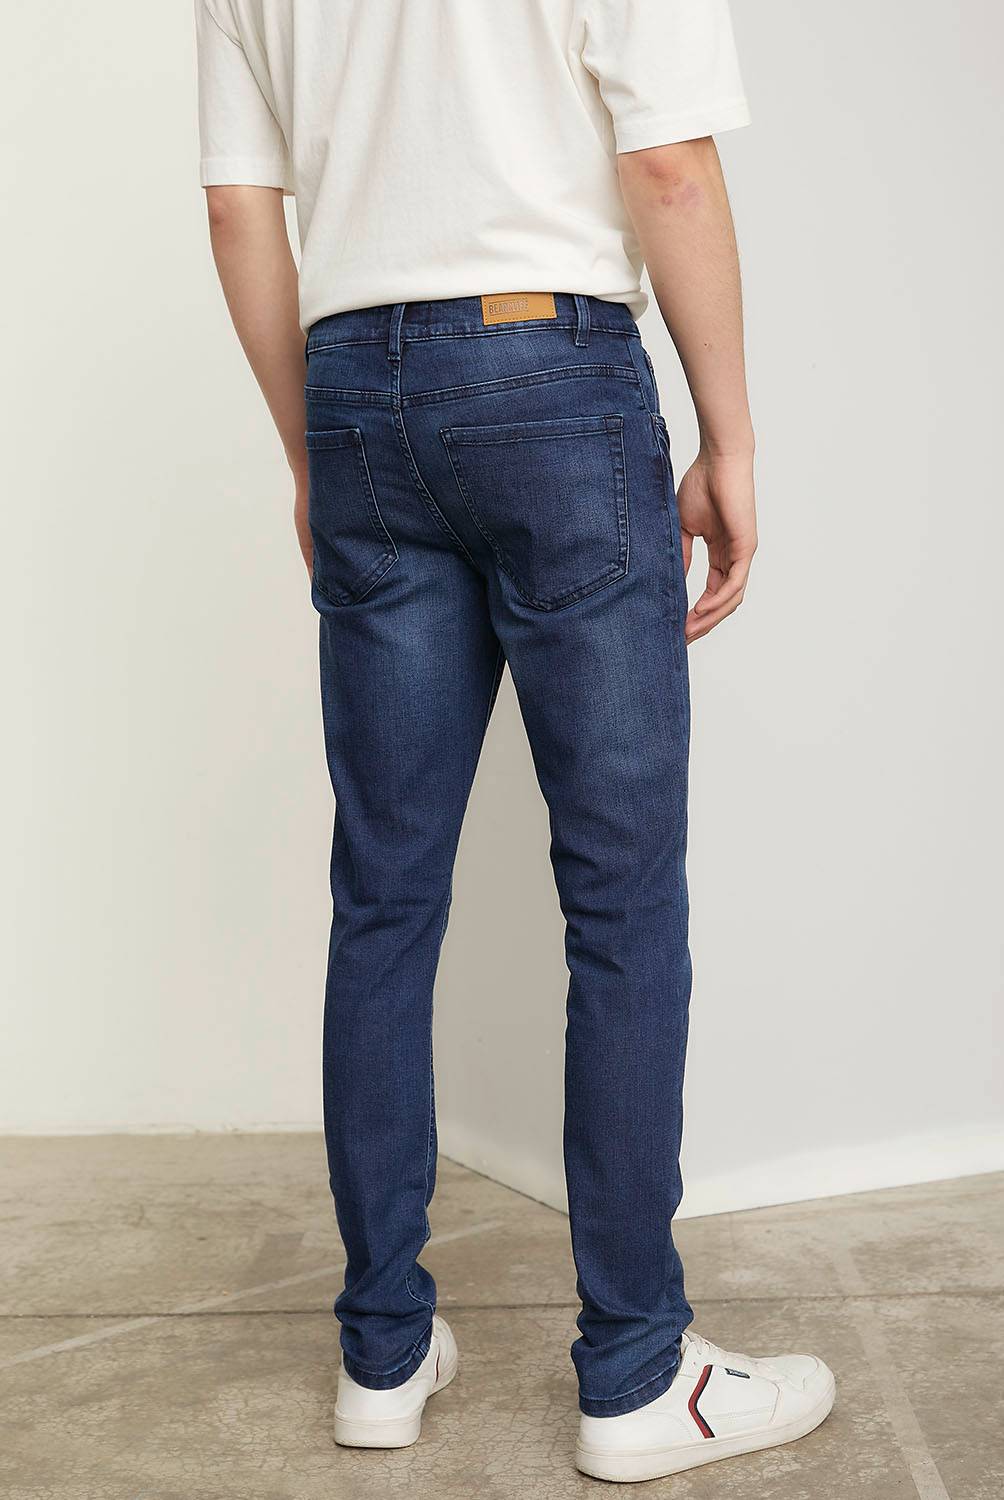 BEARCLIFF - Jeans Super Skinny Fit Hombre Bearcliff